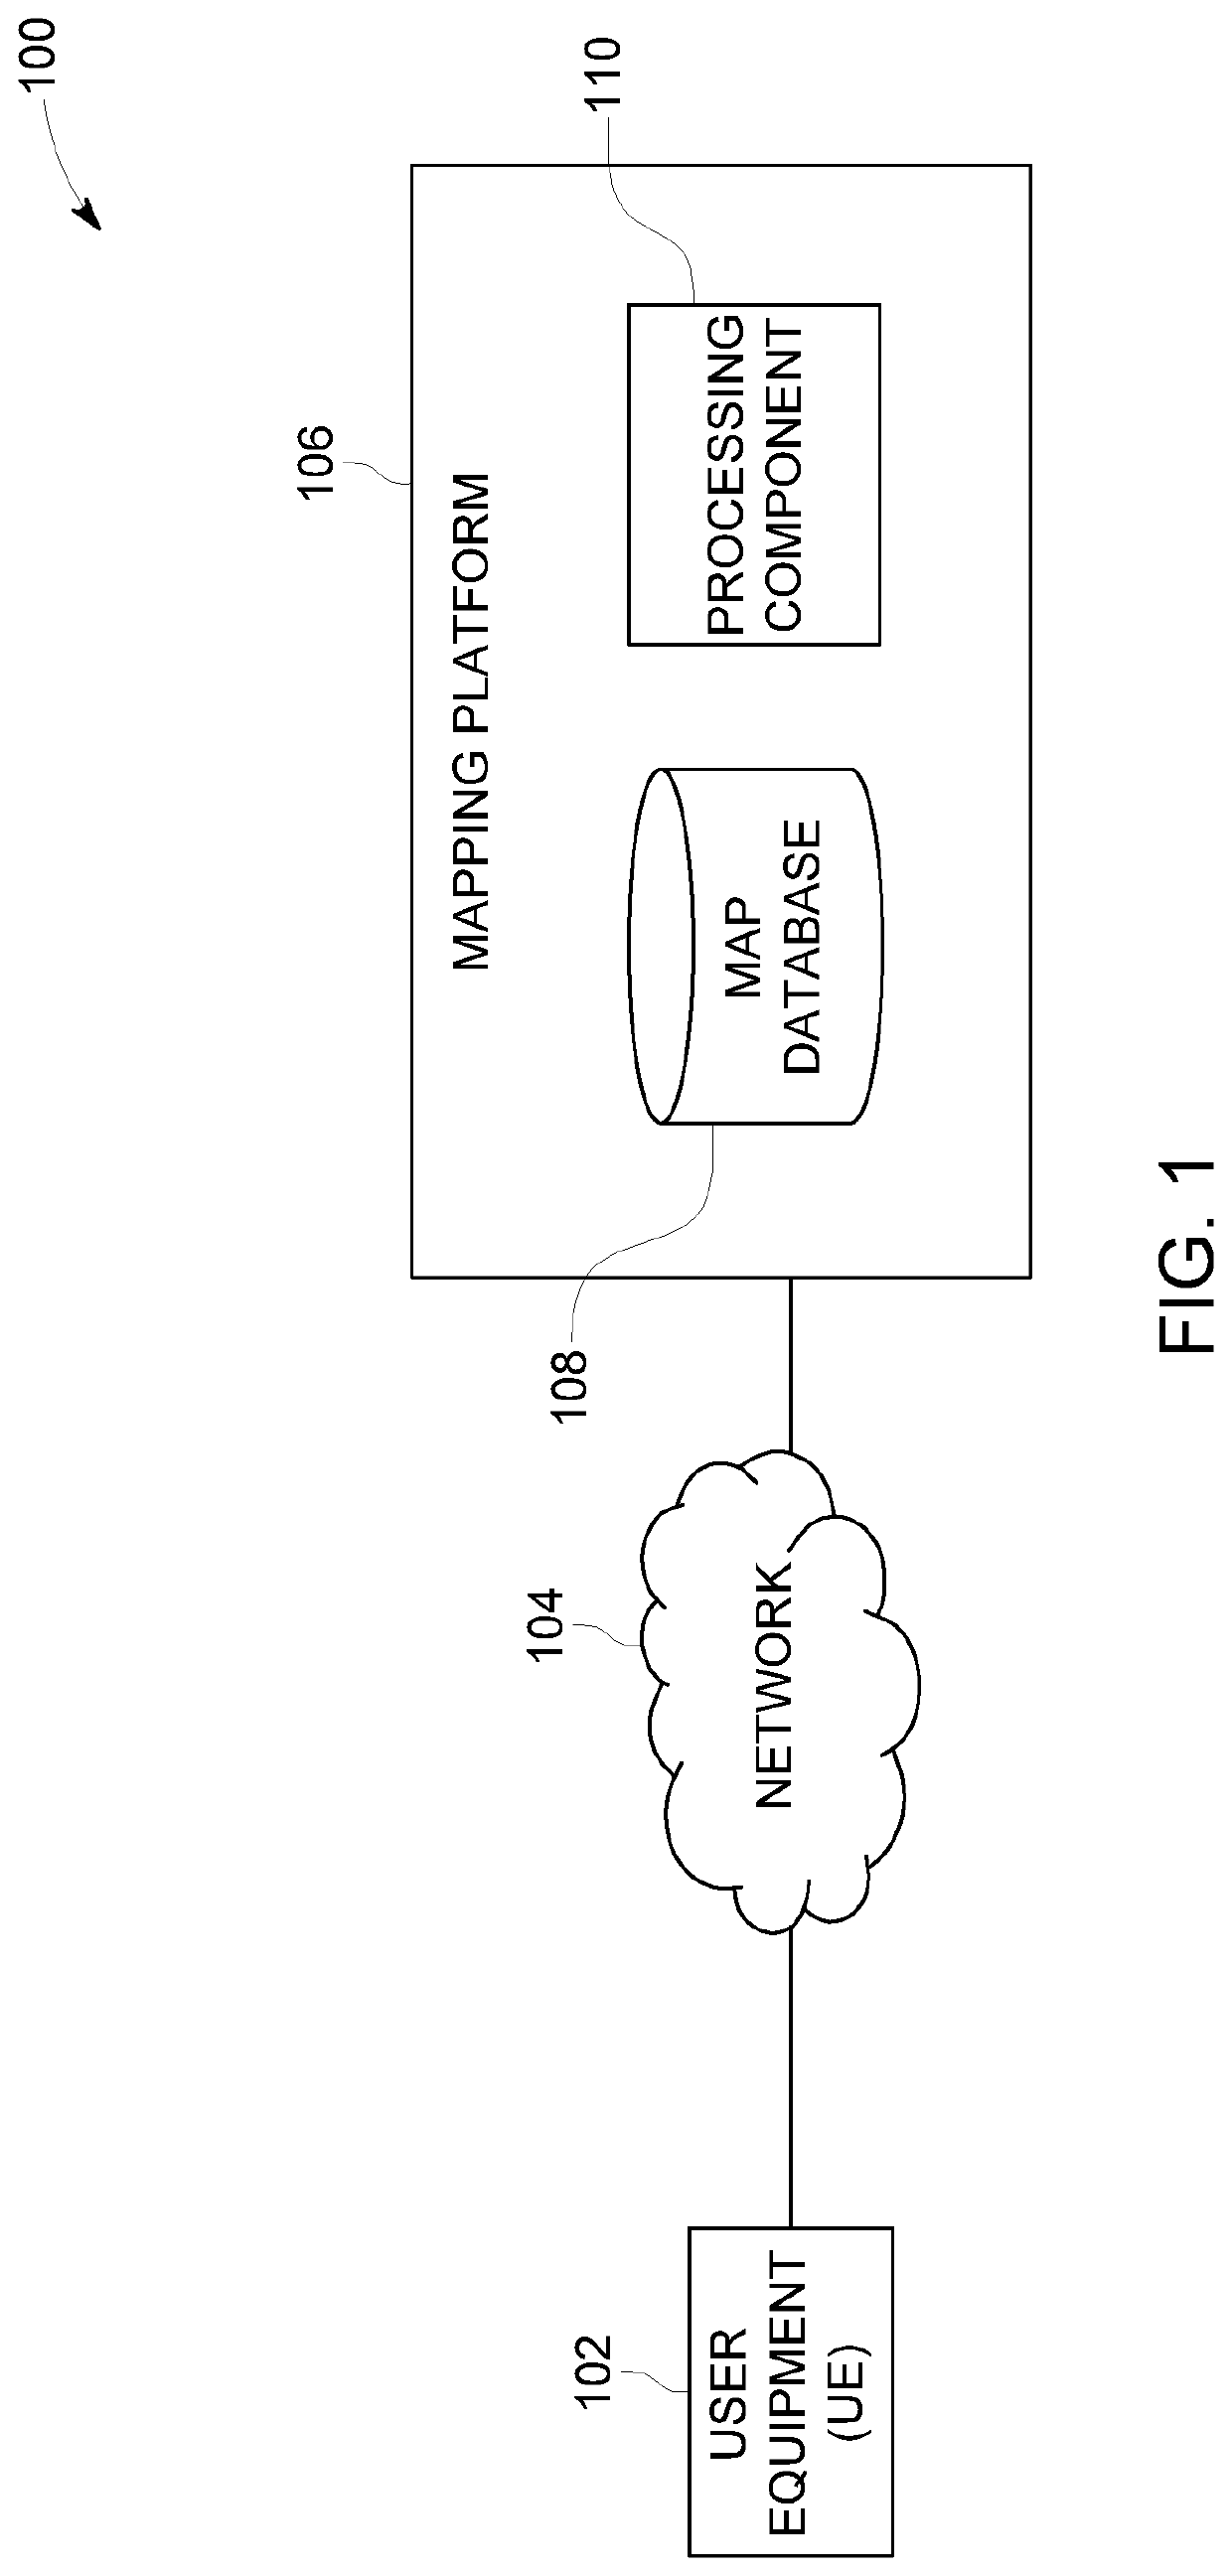 Methods and systems for providing recommendations for parking of vehicles